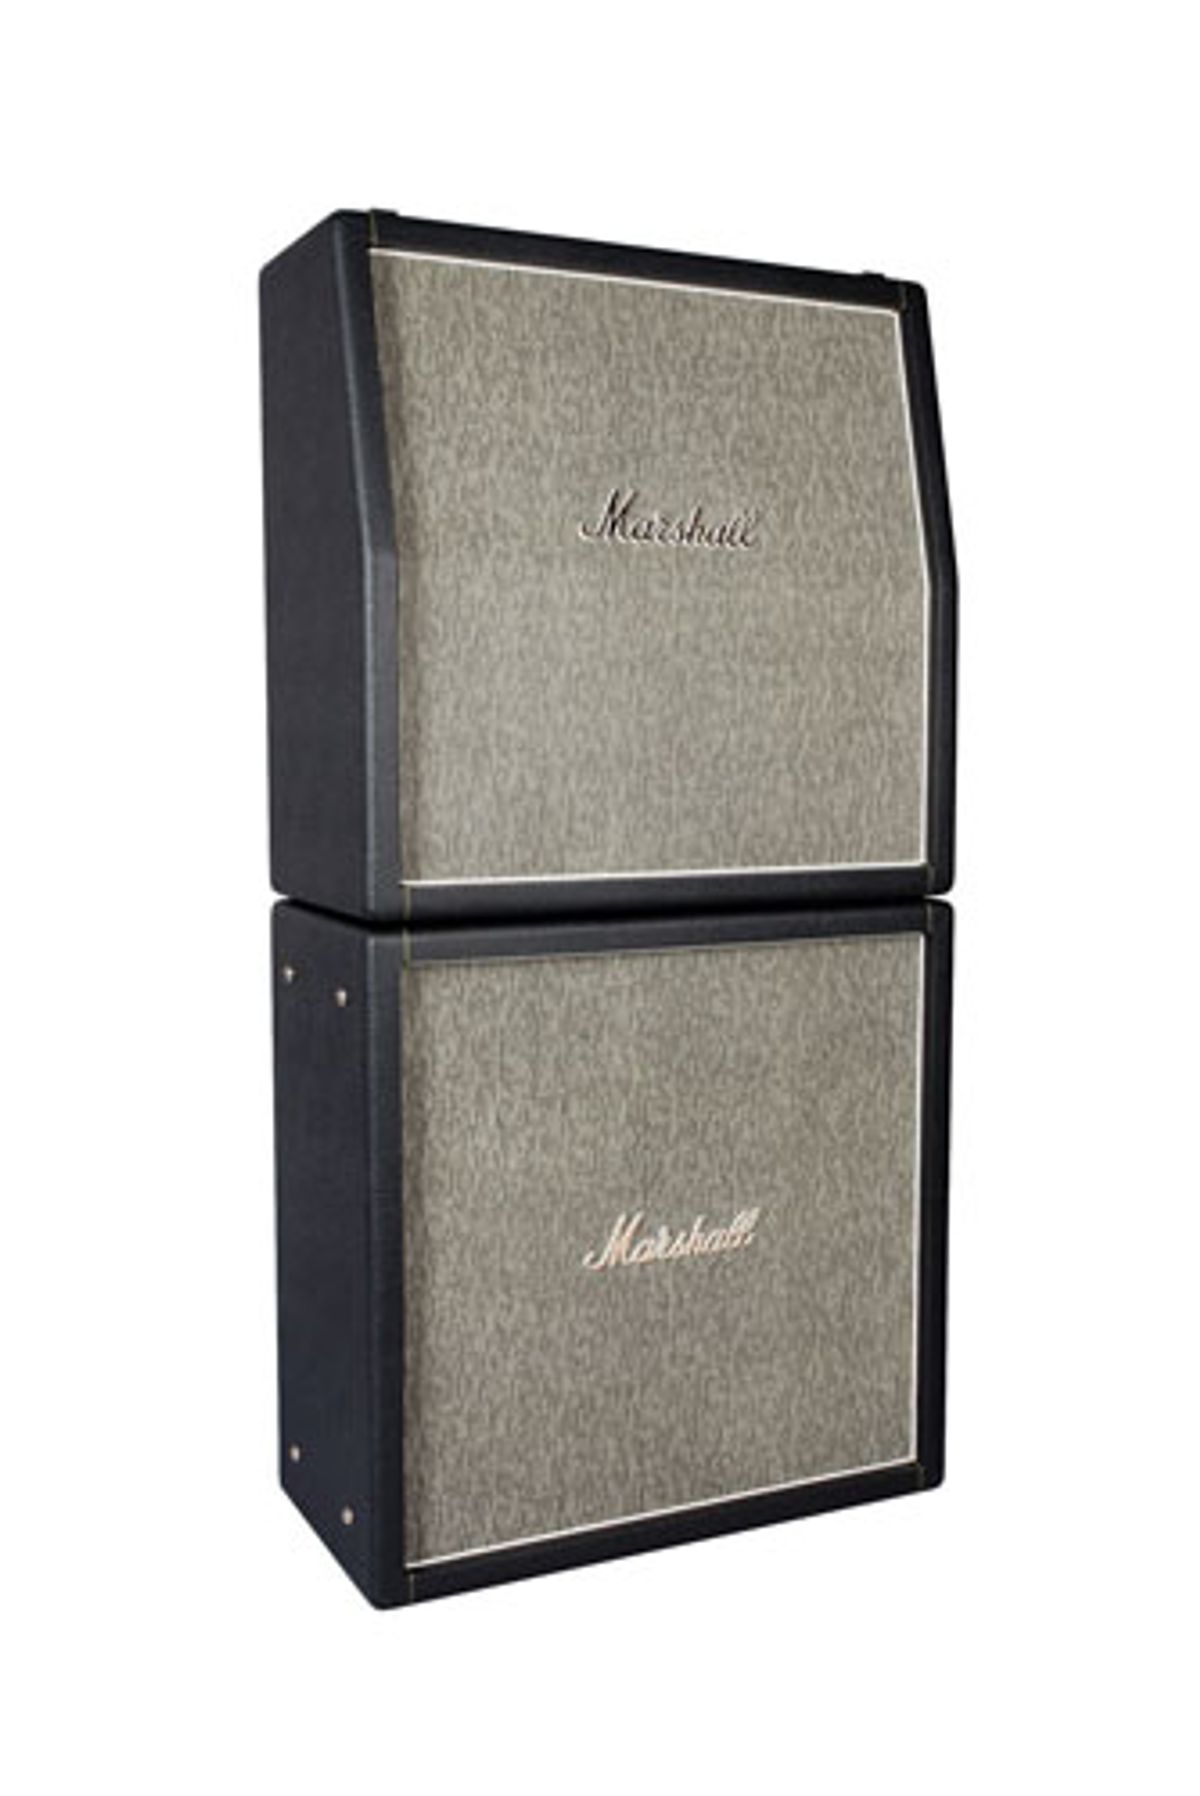 Marshall Amplification Unveils 50th Anniversary Cabinets